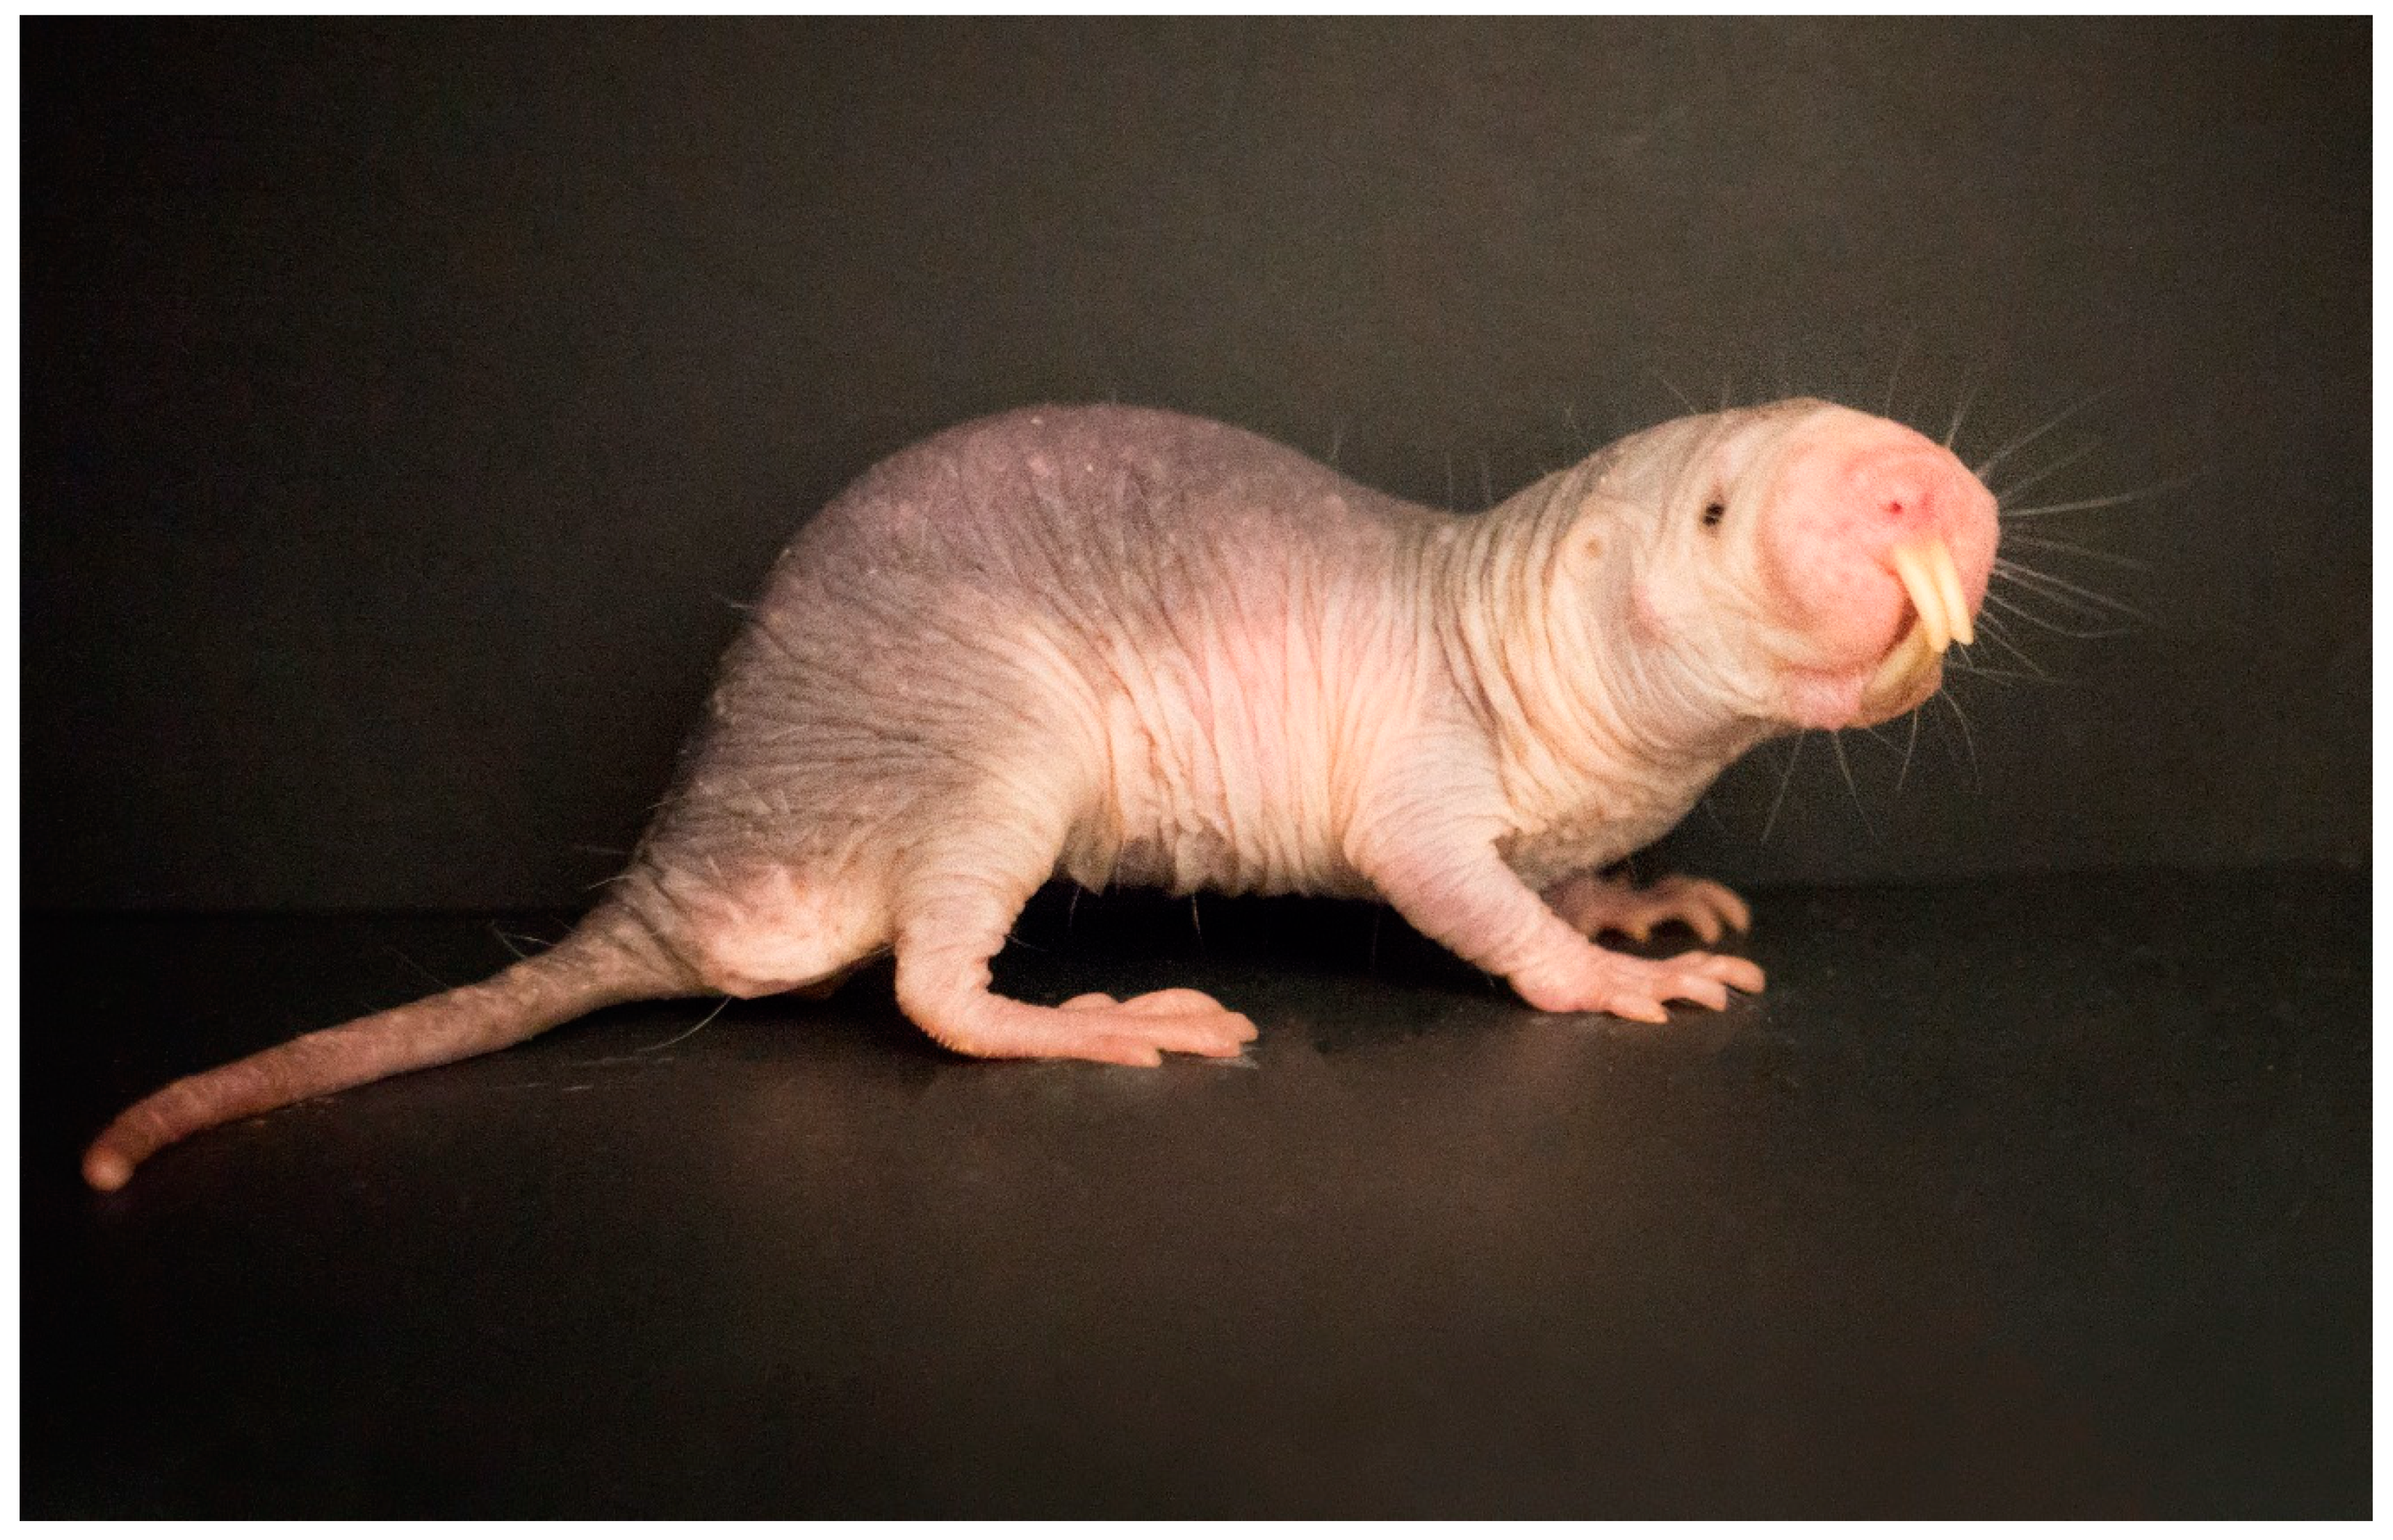 Life | Free Full-Text | The Naked Mole-Rat: An Unusual Organism with an  Unexpected Latent Potential for Increased Intelligence?